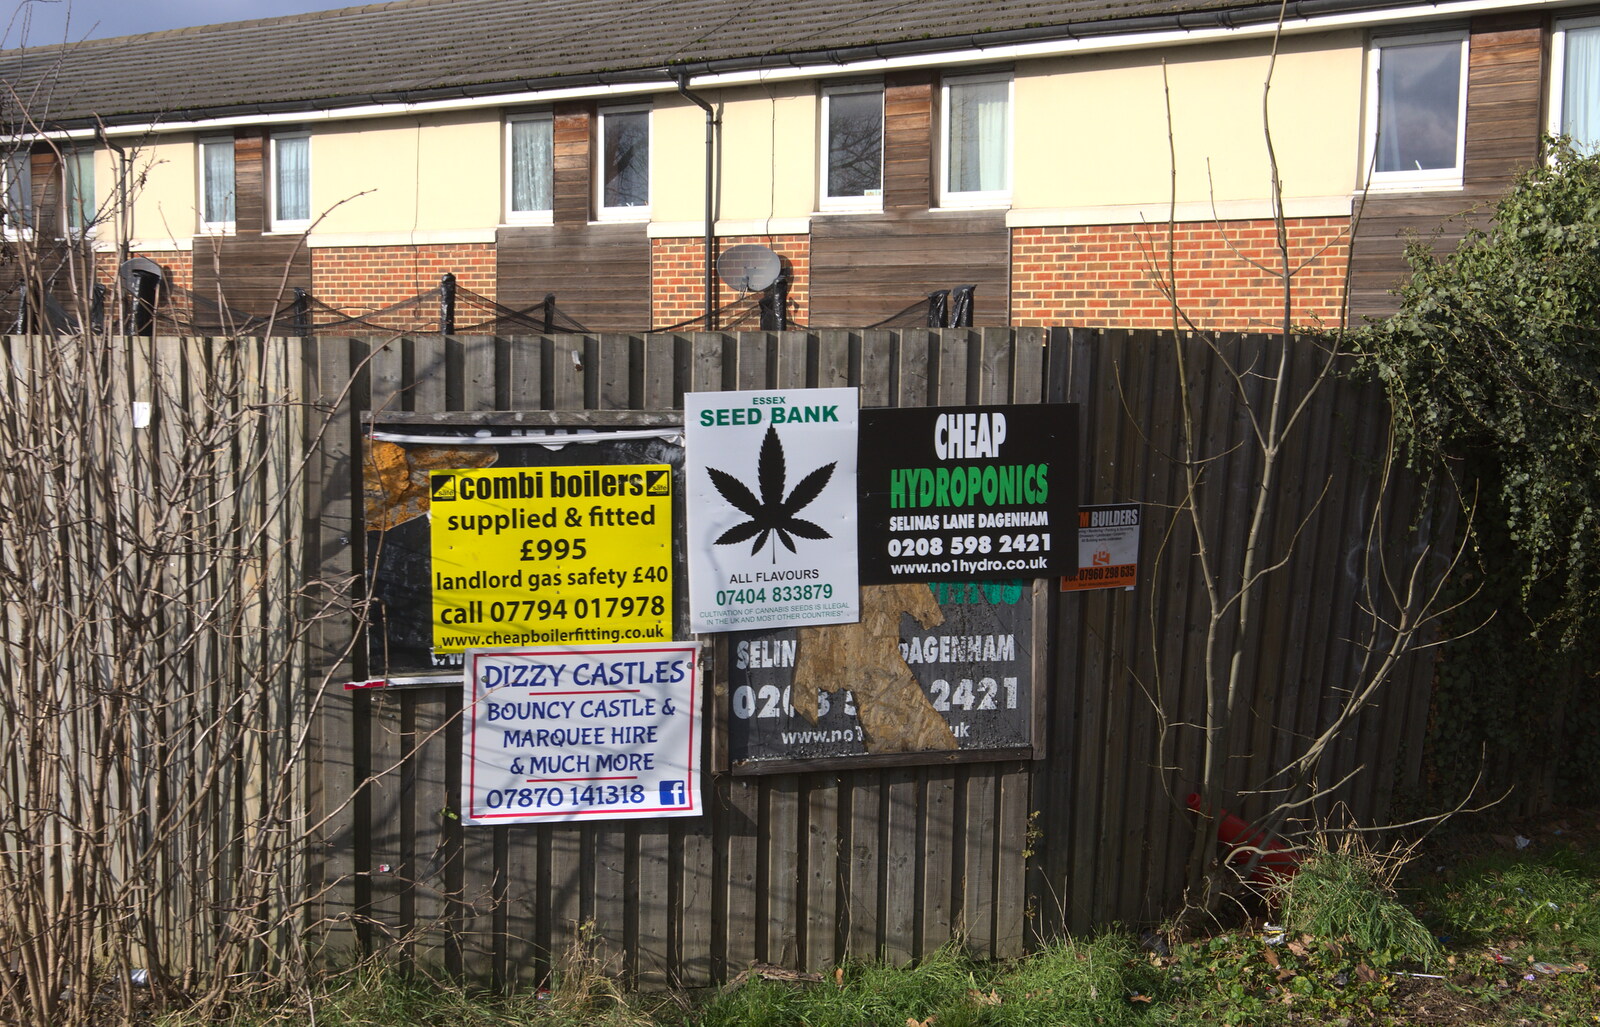 There's a lot of drug paraphernalia for sale from A Wintry Trip Down South, Walkford, Dorset - 1st February 2019